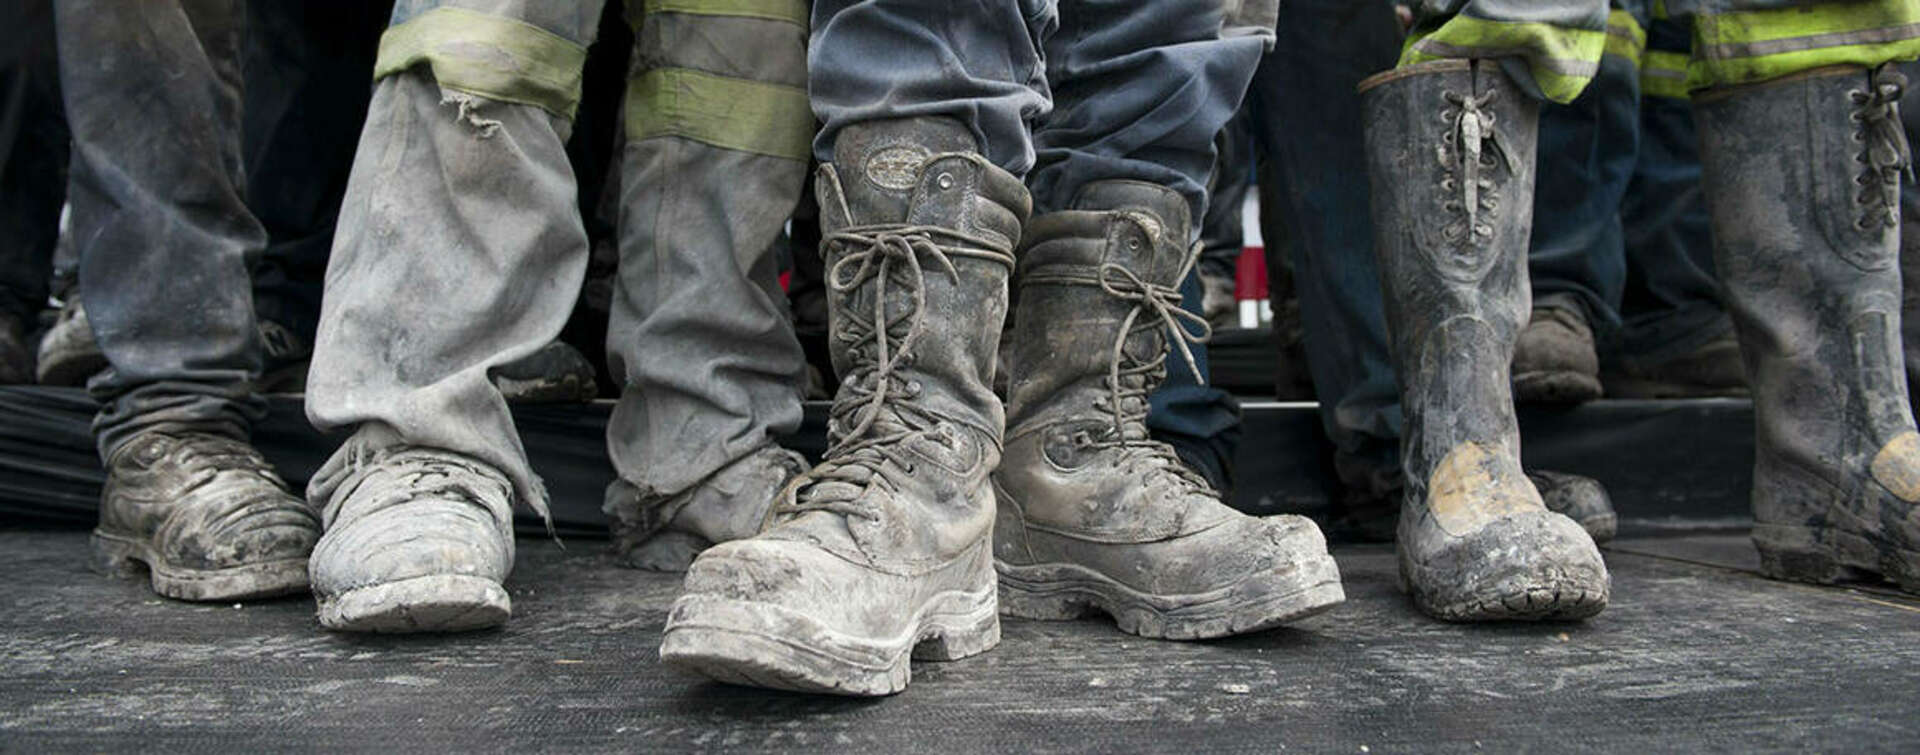 photo of construction workers feet in muddy boots